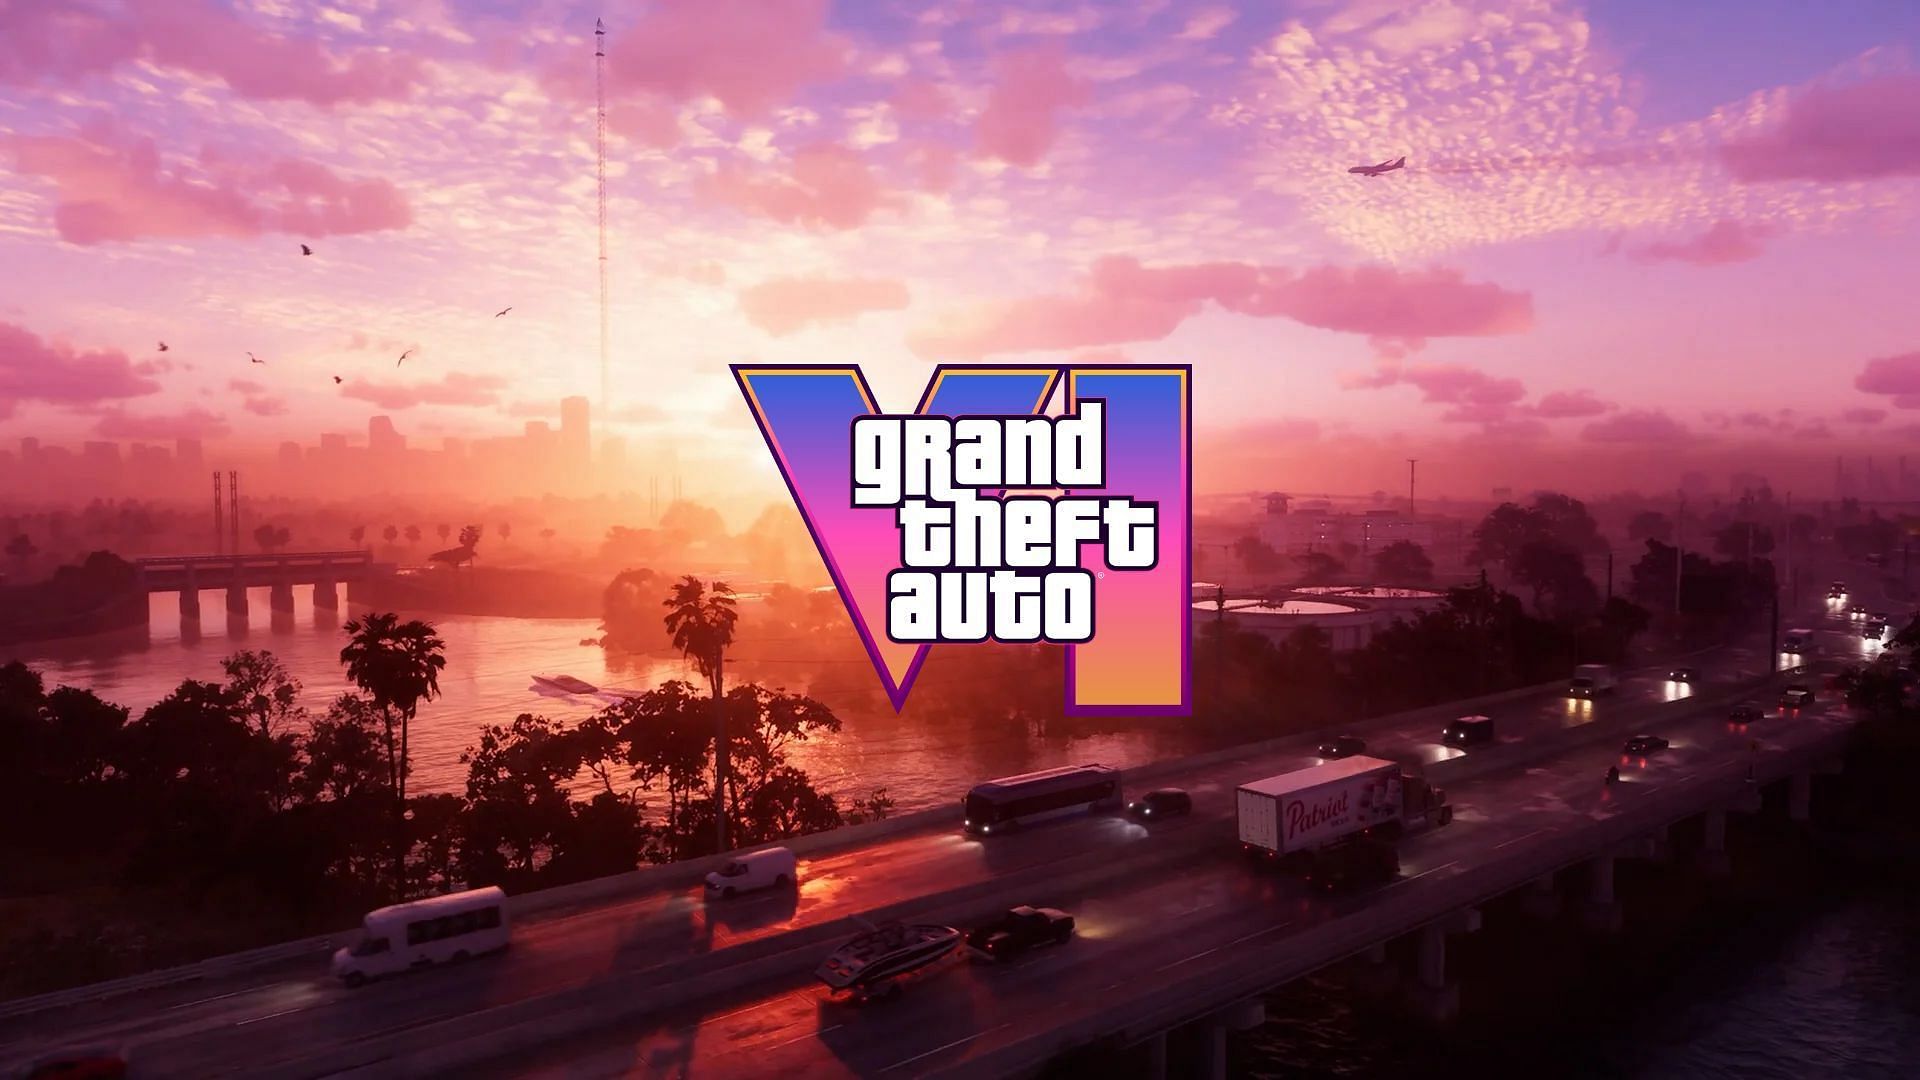 Fans have hilarious reactions to a new GTA 6 real-life trailer (Image via Rockstar Games)